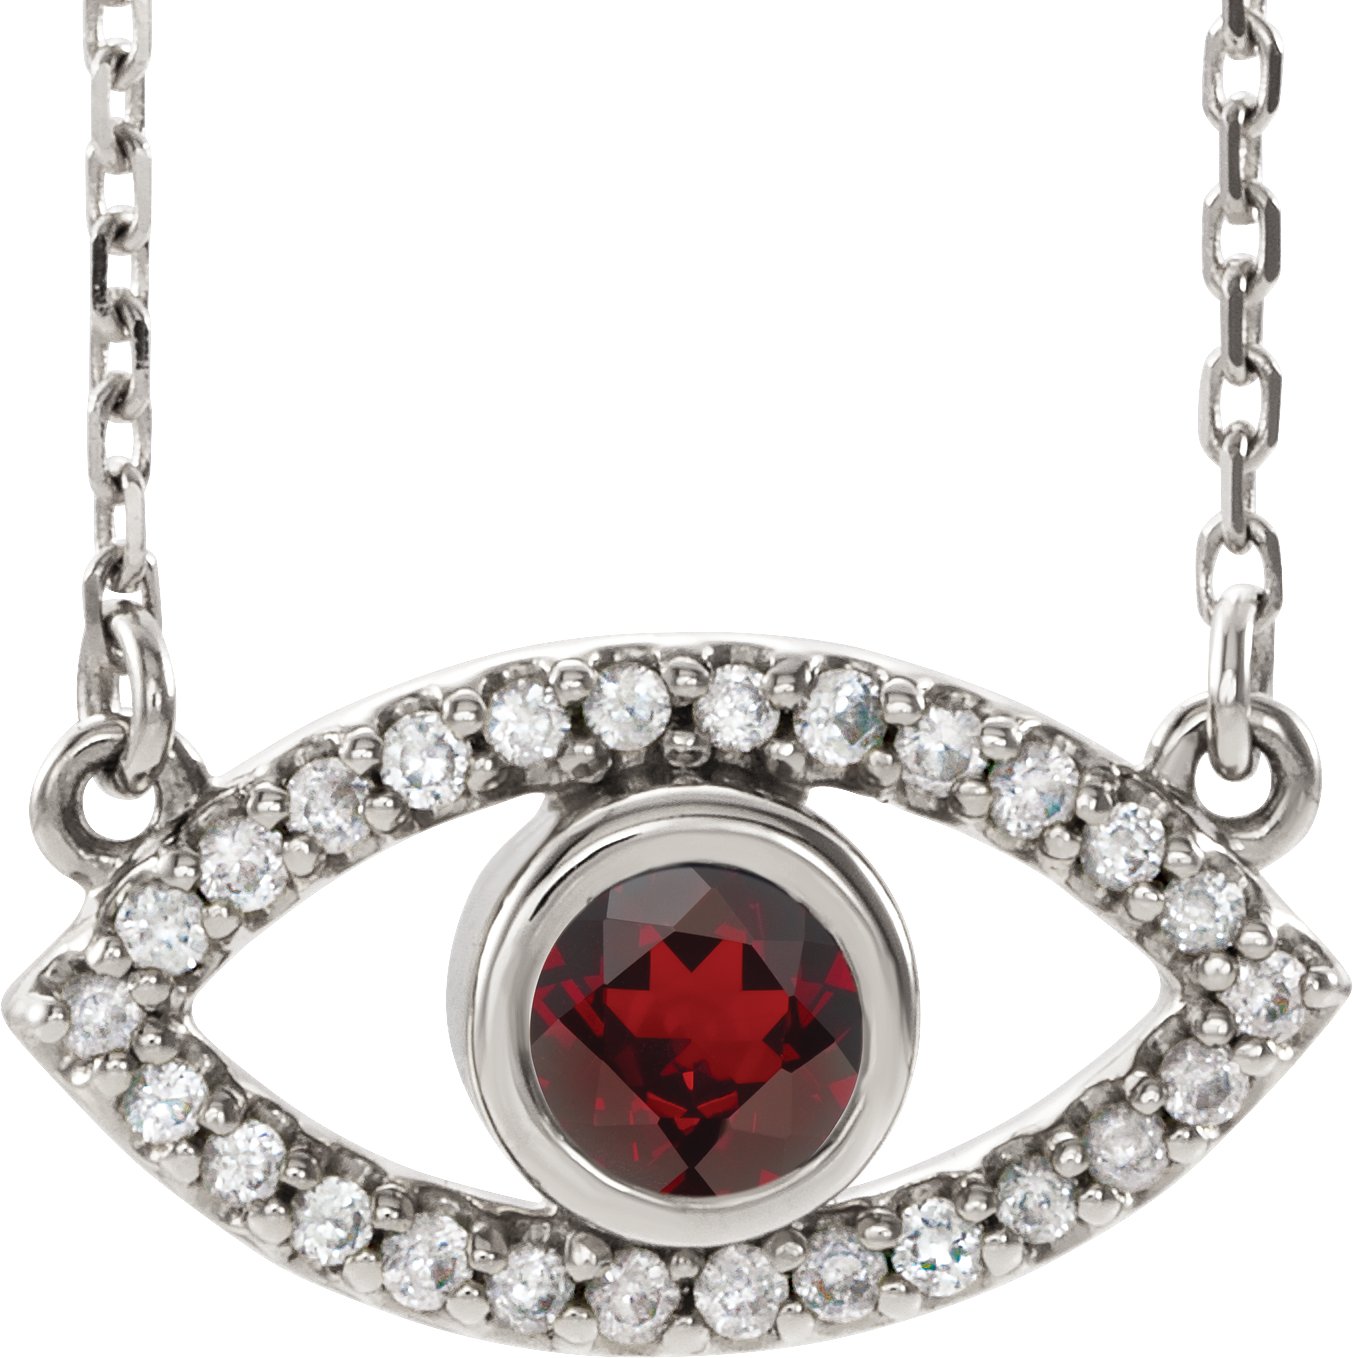 Sterling Silver Garnet Mozambique and White Sapphire Evil Eye 18 inch Necklace Ref. 14901628